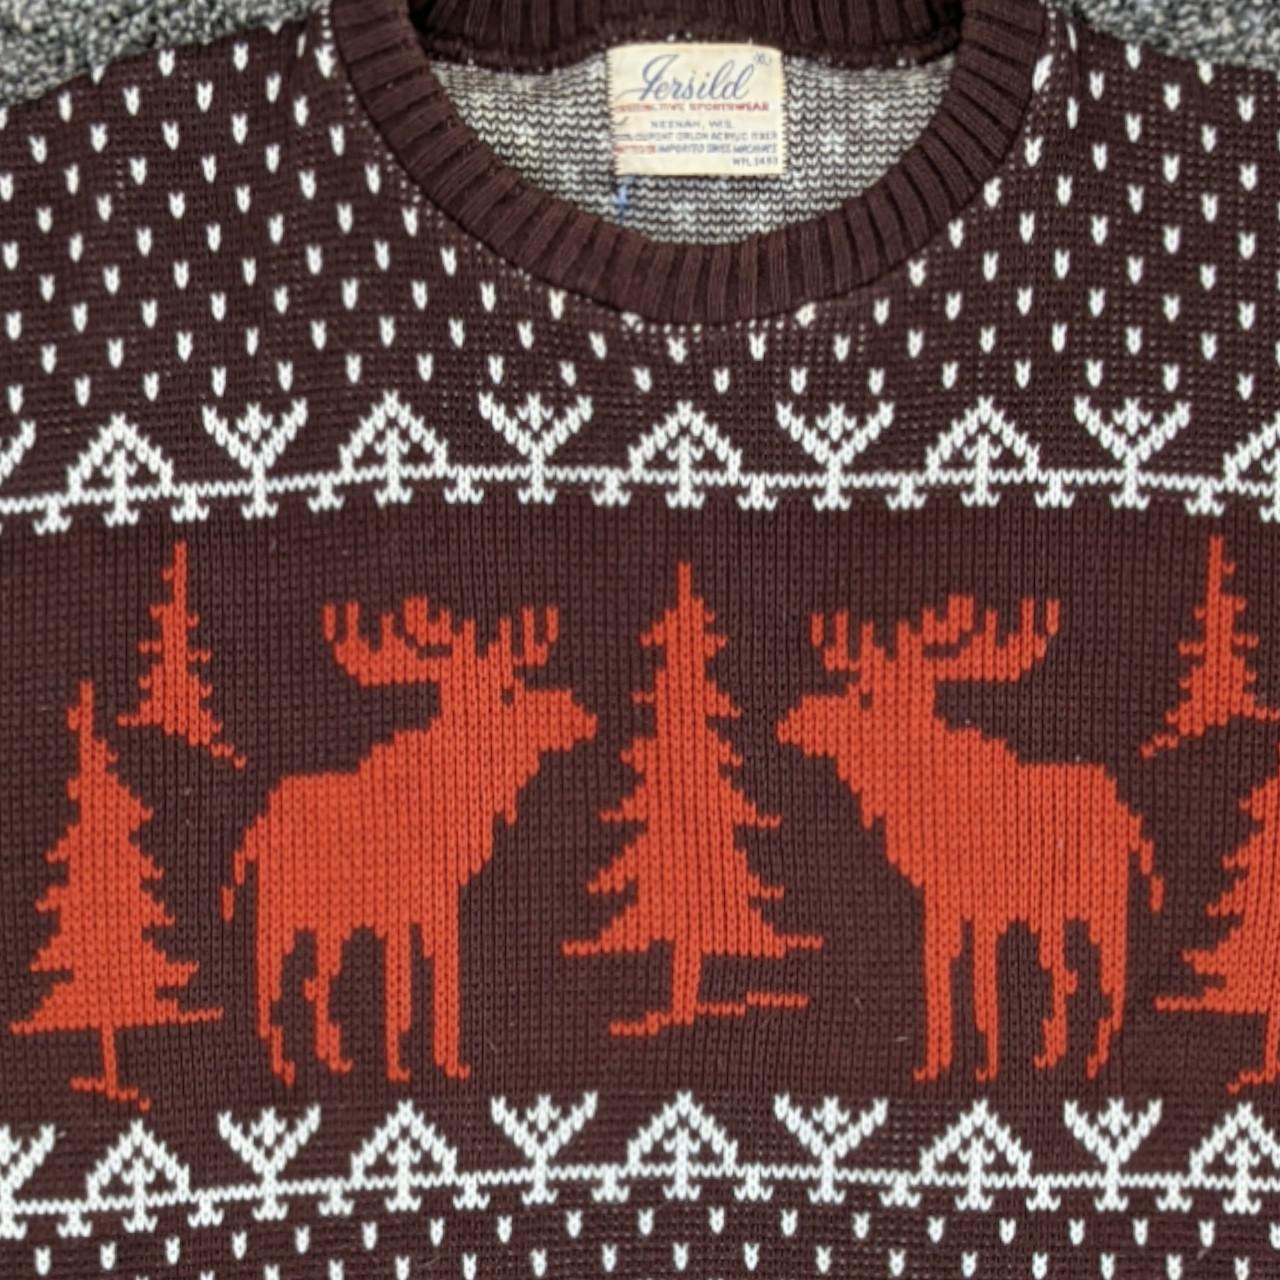 Product Image 2 - 60s Christmas Sweater

From Jersild of